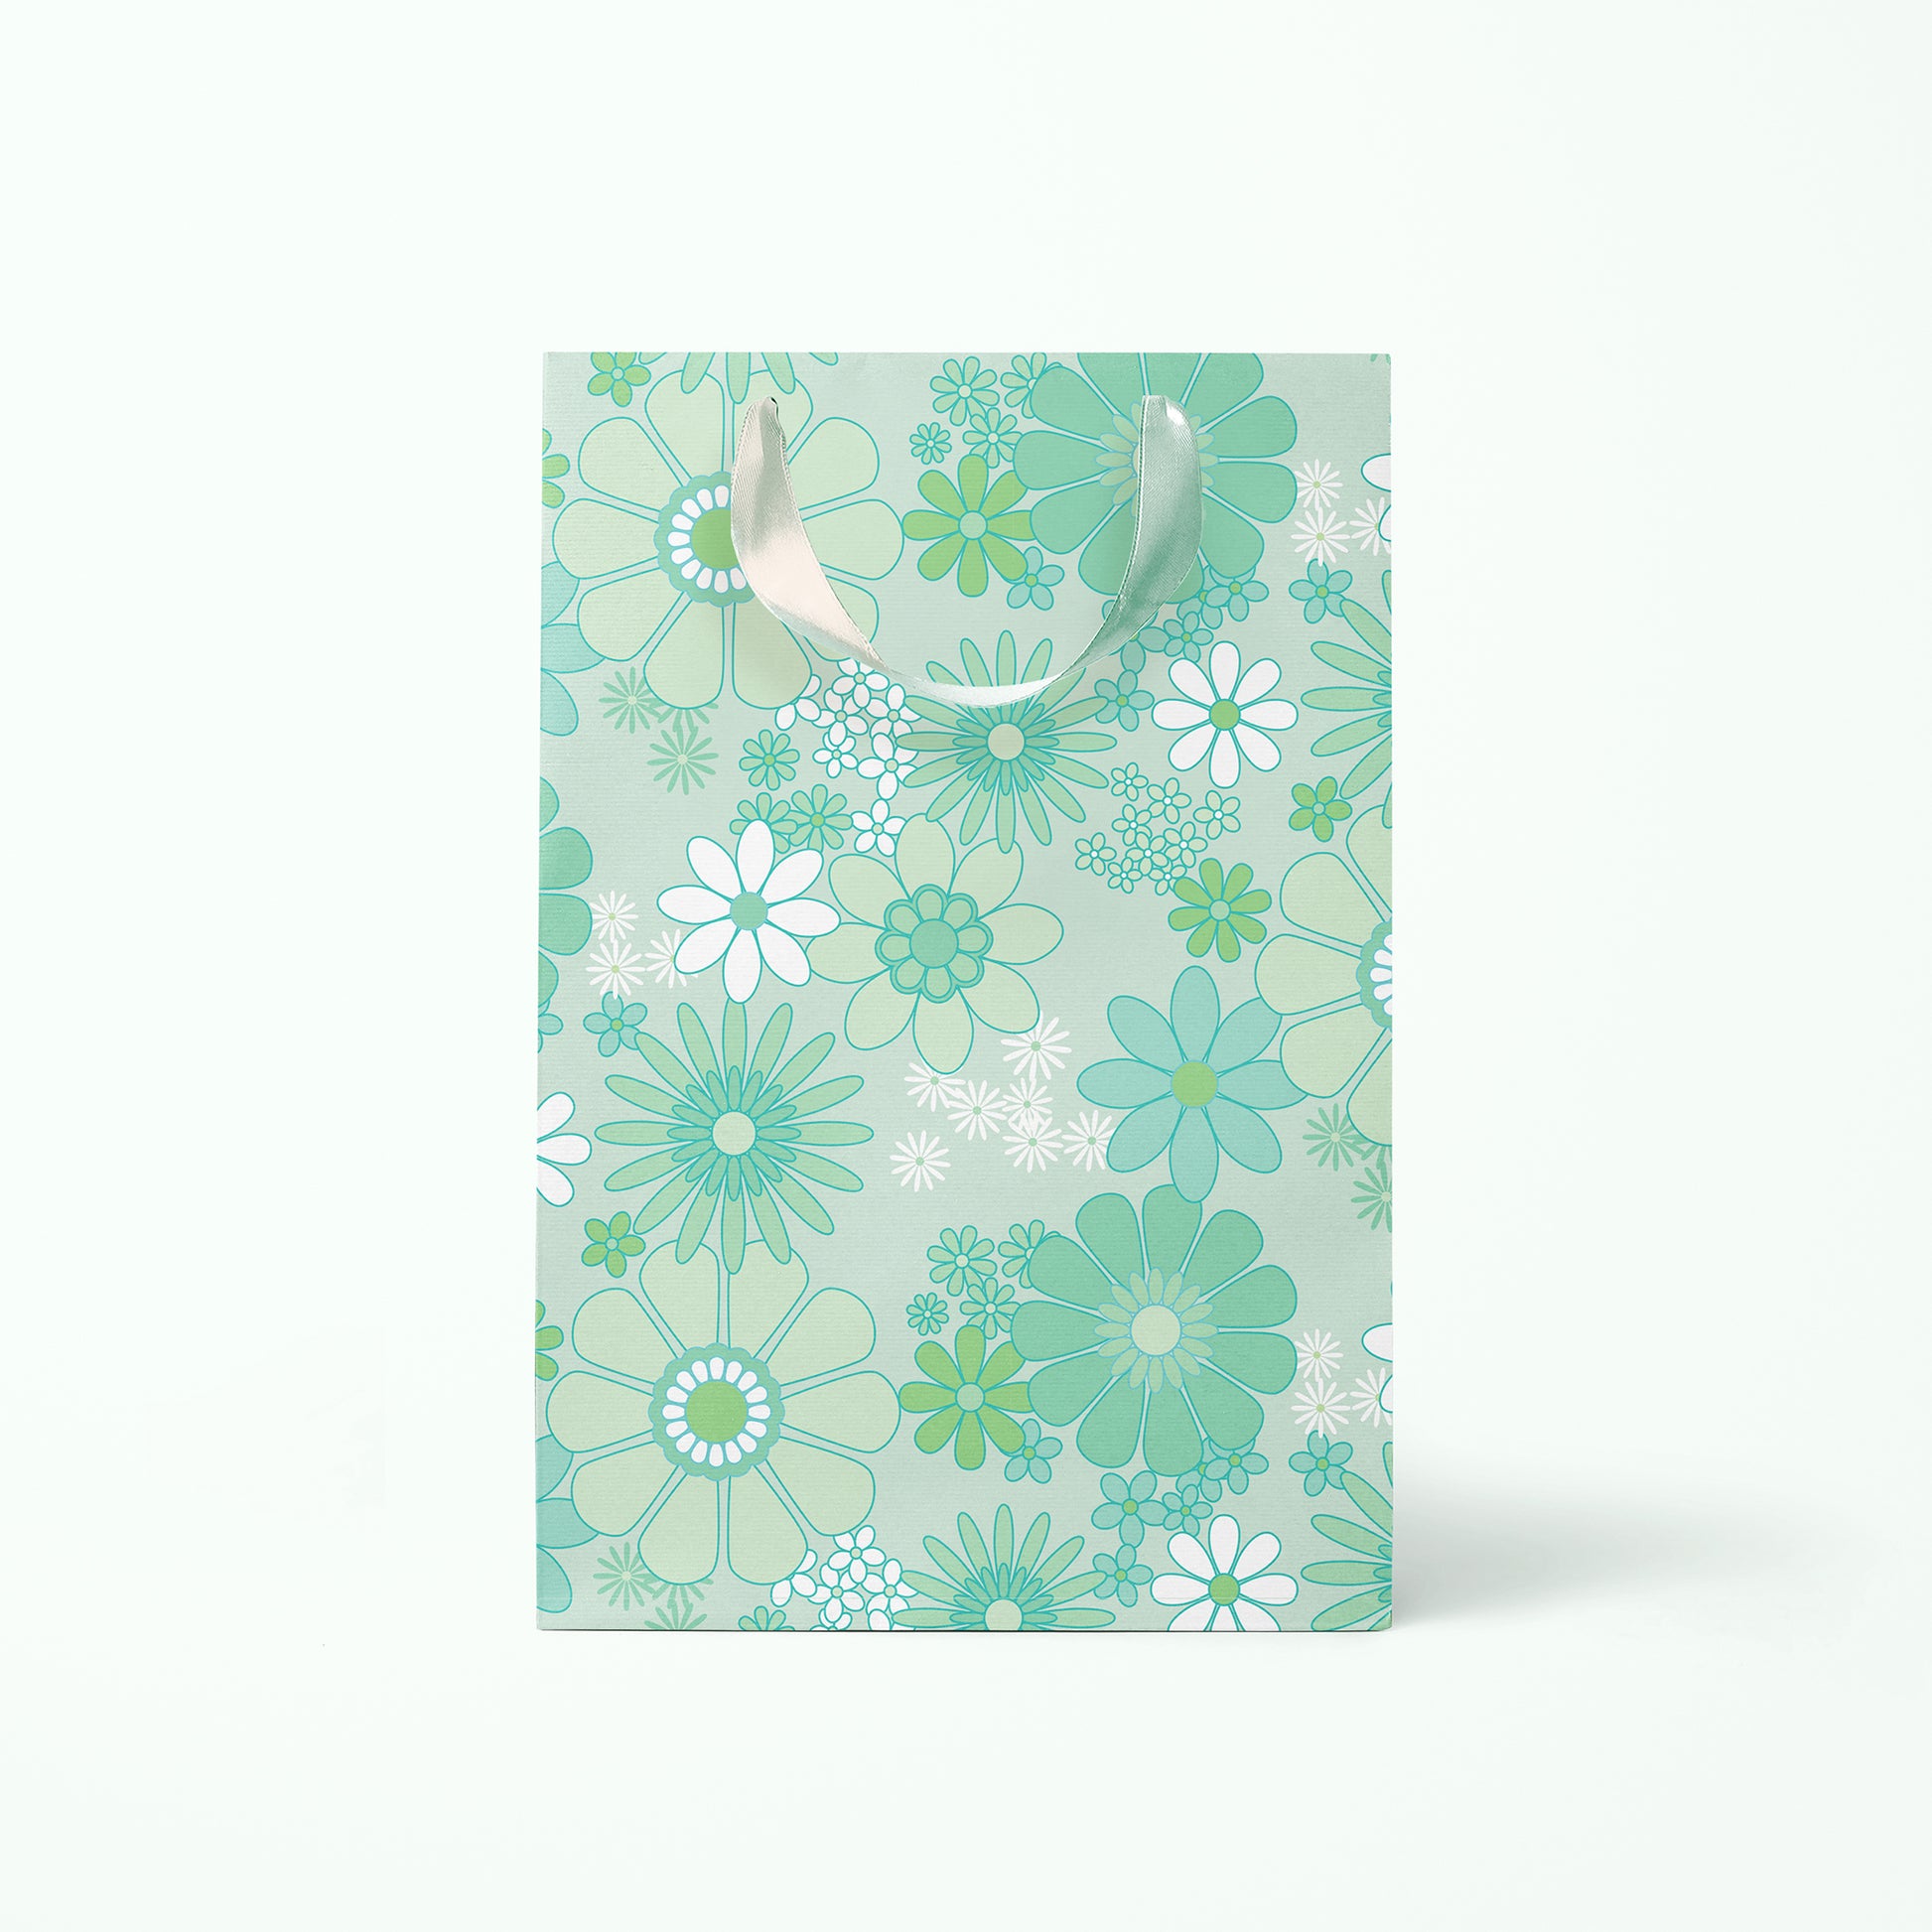 On a white background is a rendering of the medium gift bag with a mint and white floral print and ribbon handles.